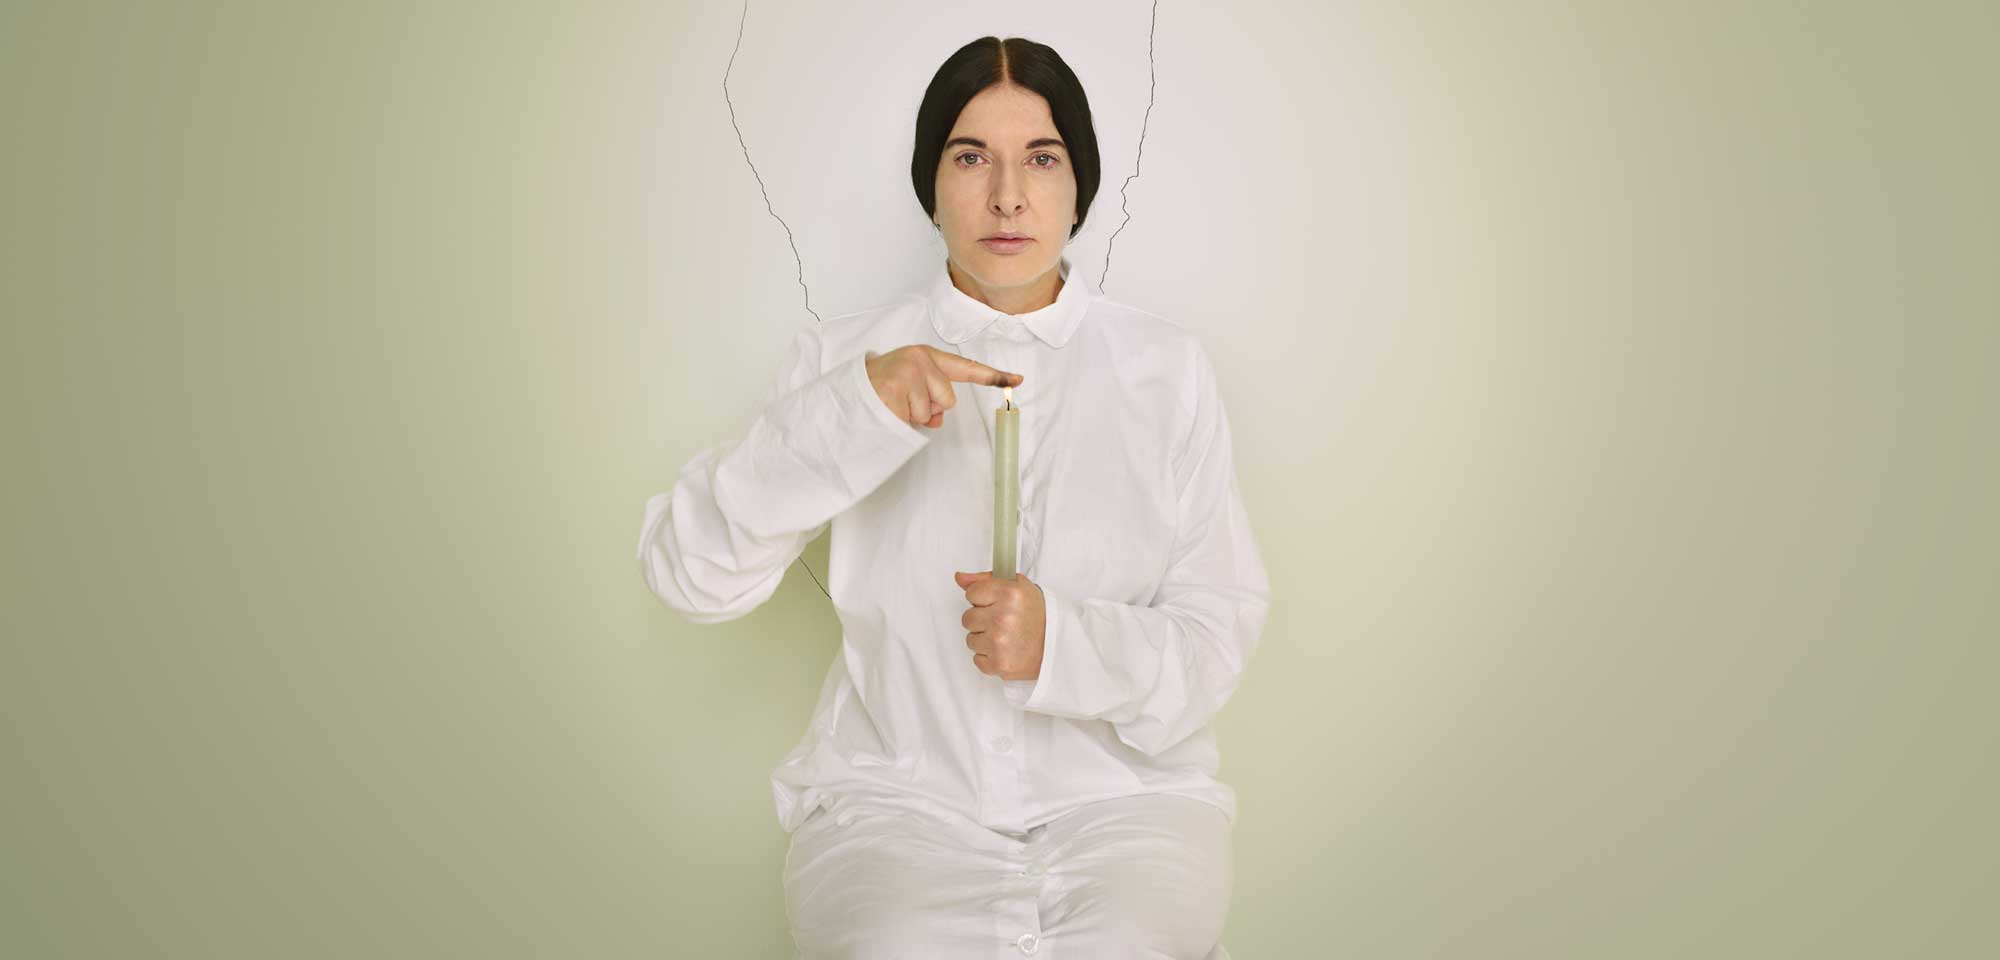 Marina Abramović Artist Portrait with a Candle (C) dalla serie Places of Power, 2013. Courtesy of Marina Abramović Archives© Marina Abramović by SIAE 2018